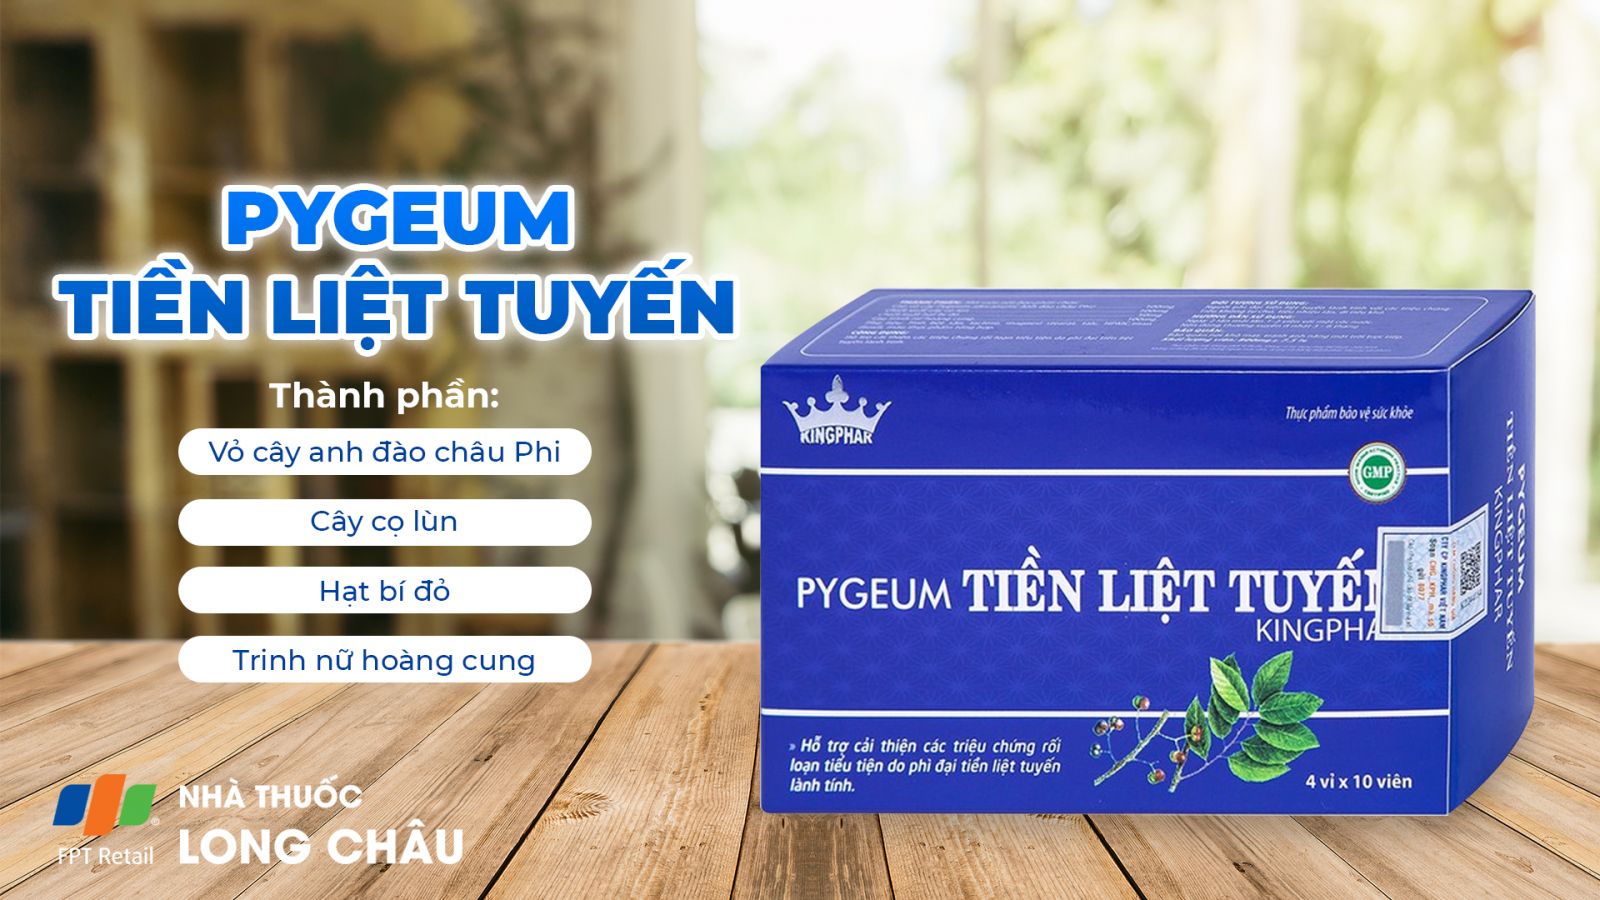 Pygeum Tiền Liệt Tuyến 1